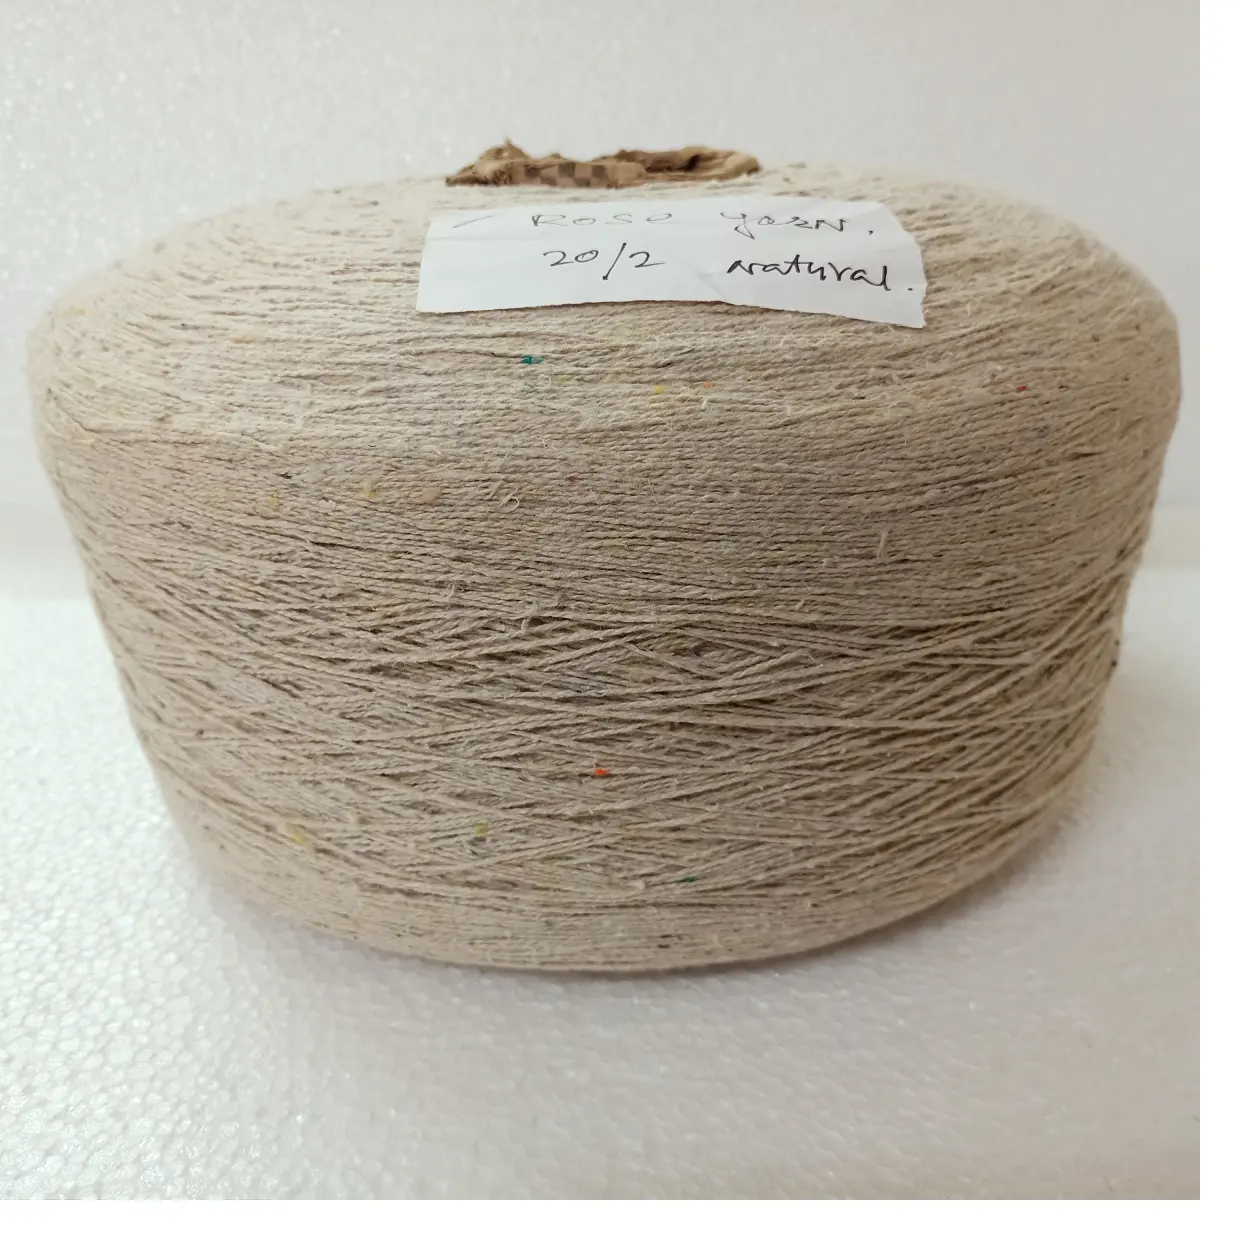 natural rose fiber yarn made from natural rose fiber available in count 20/2 NM ideal for textile weavers and spinners